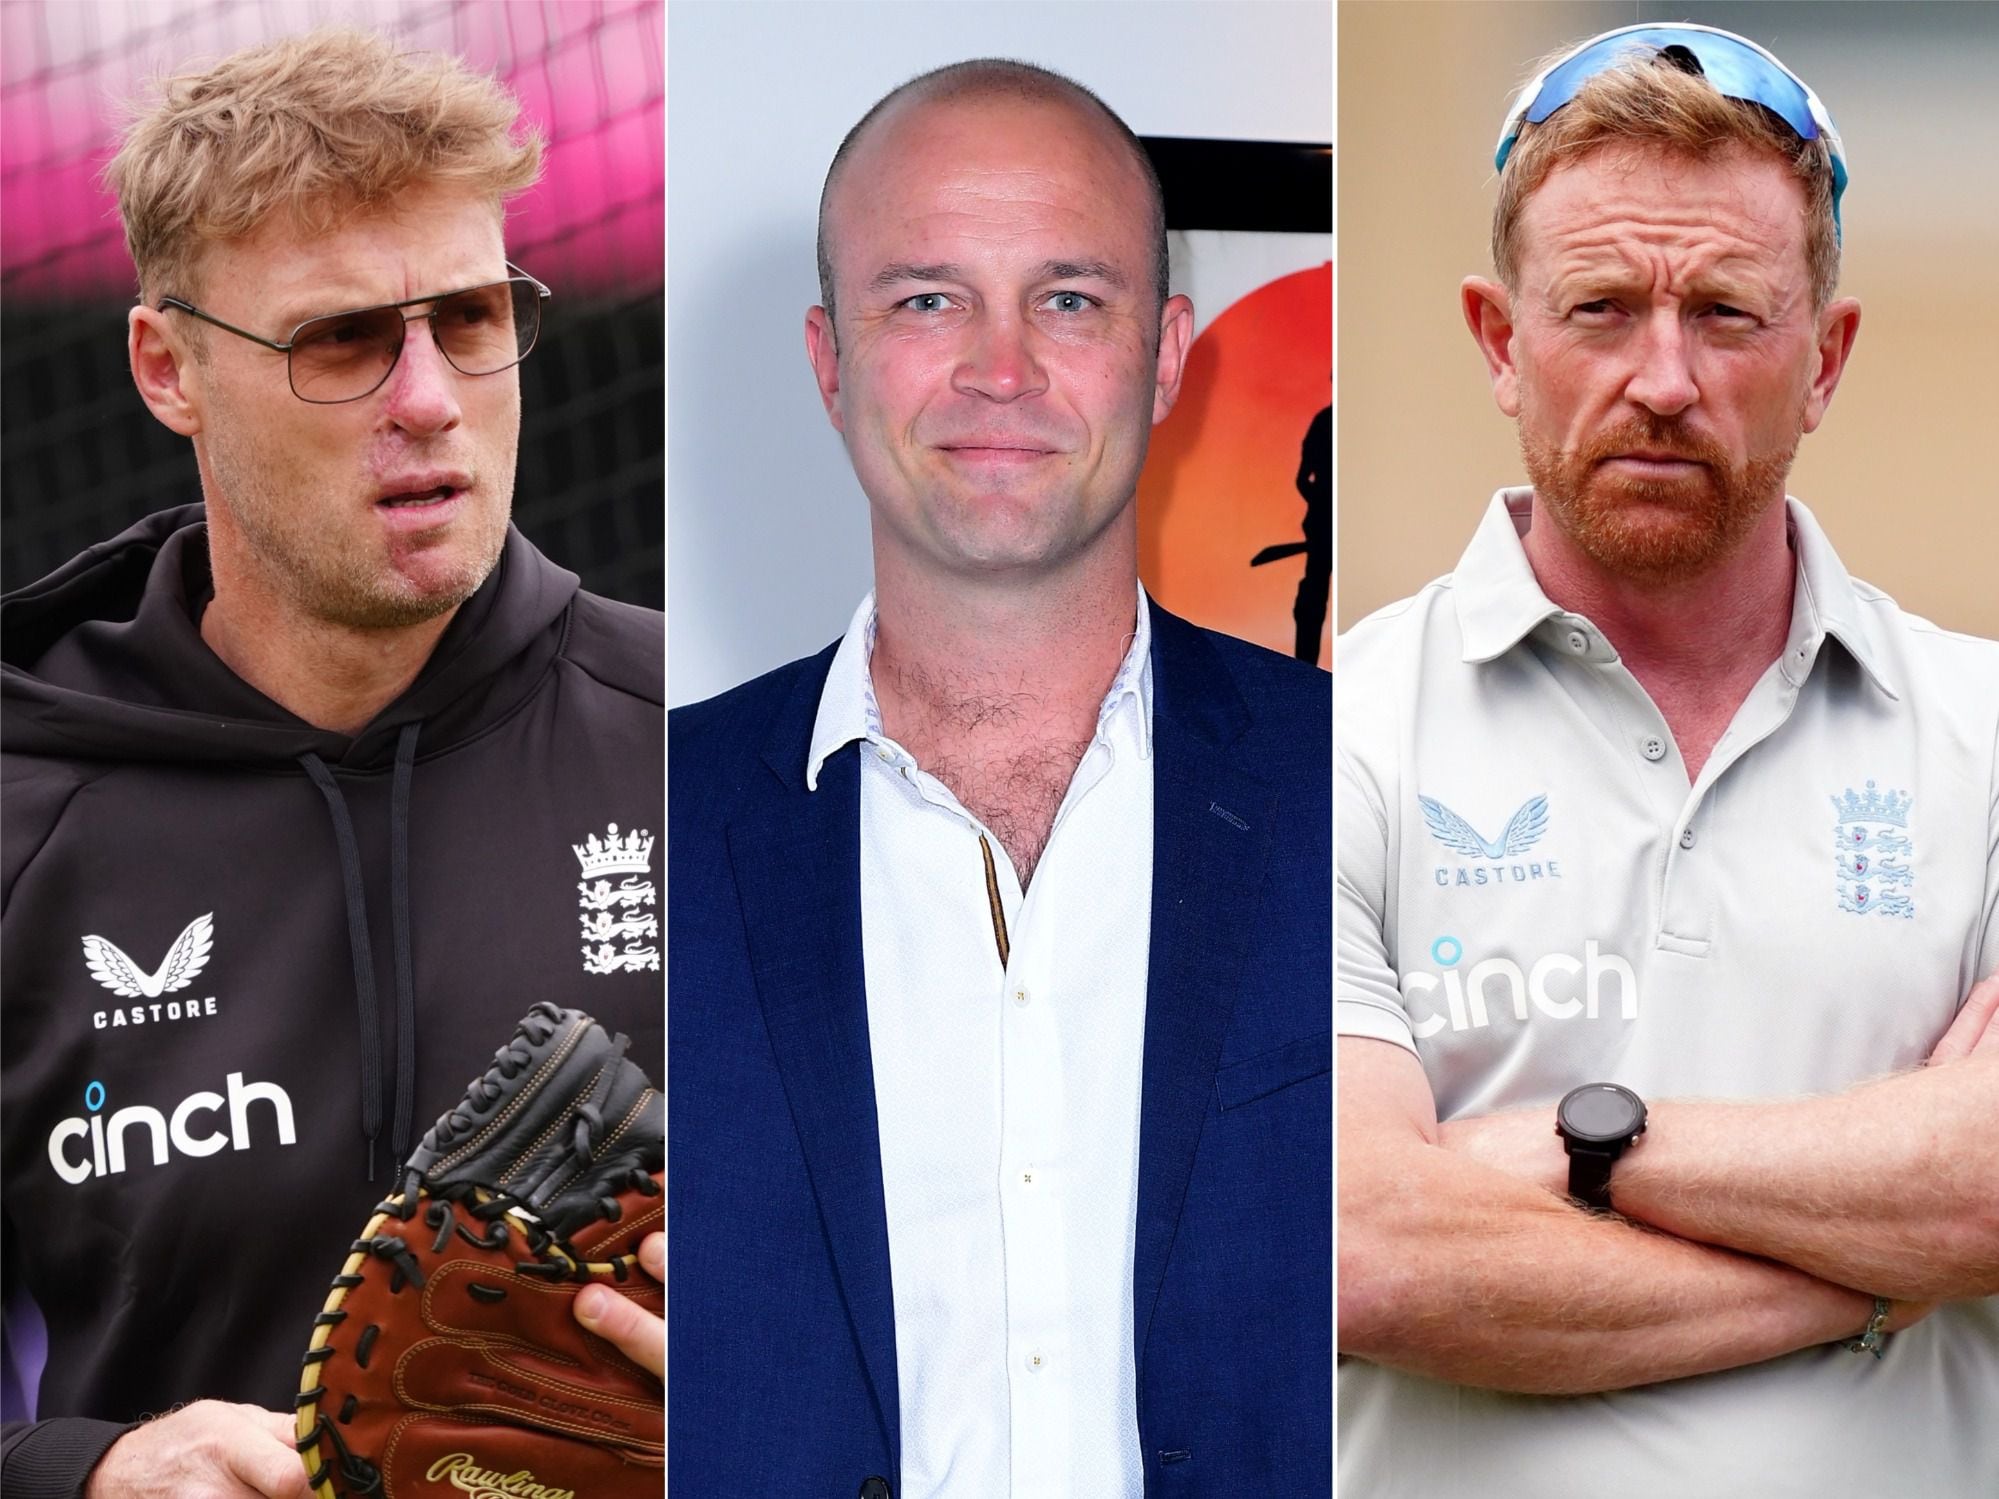 Who could be considered as England’s new white-ball coach?